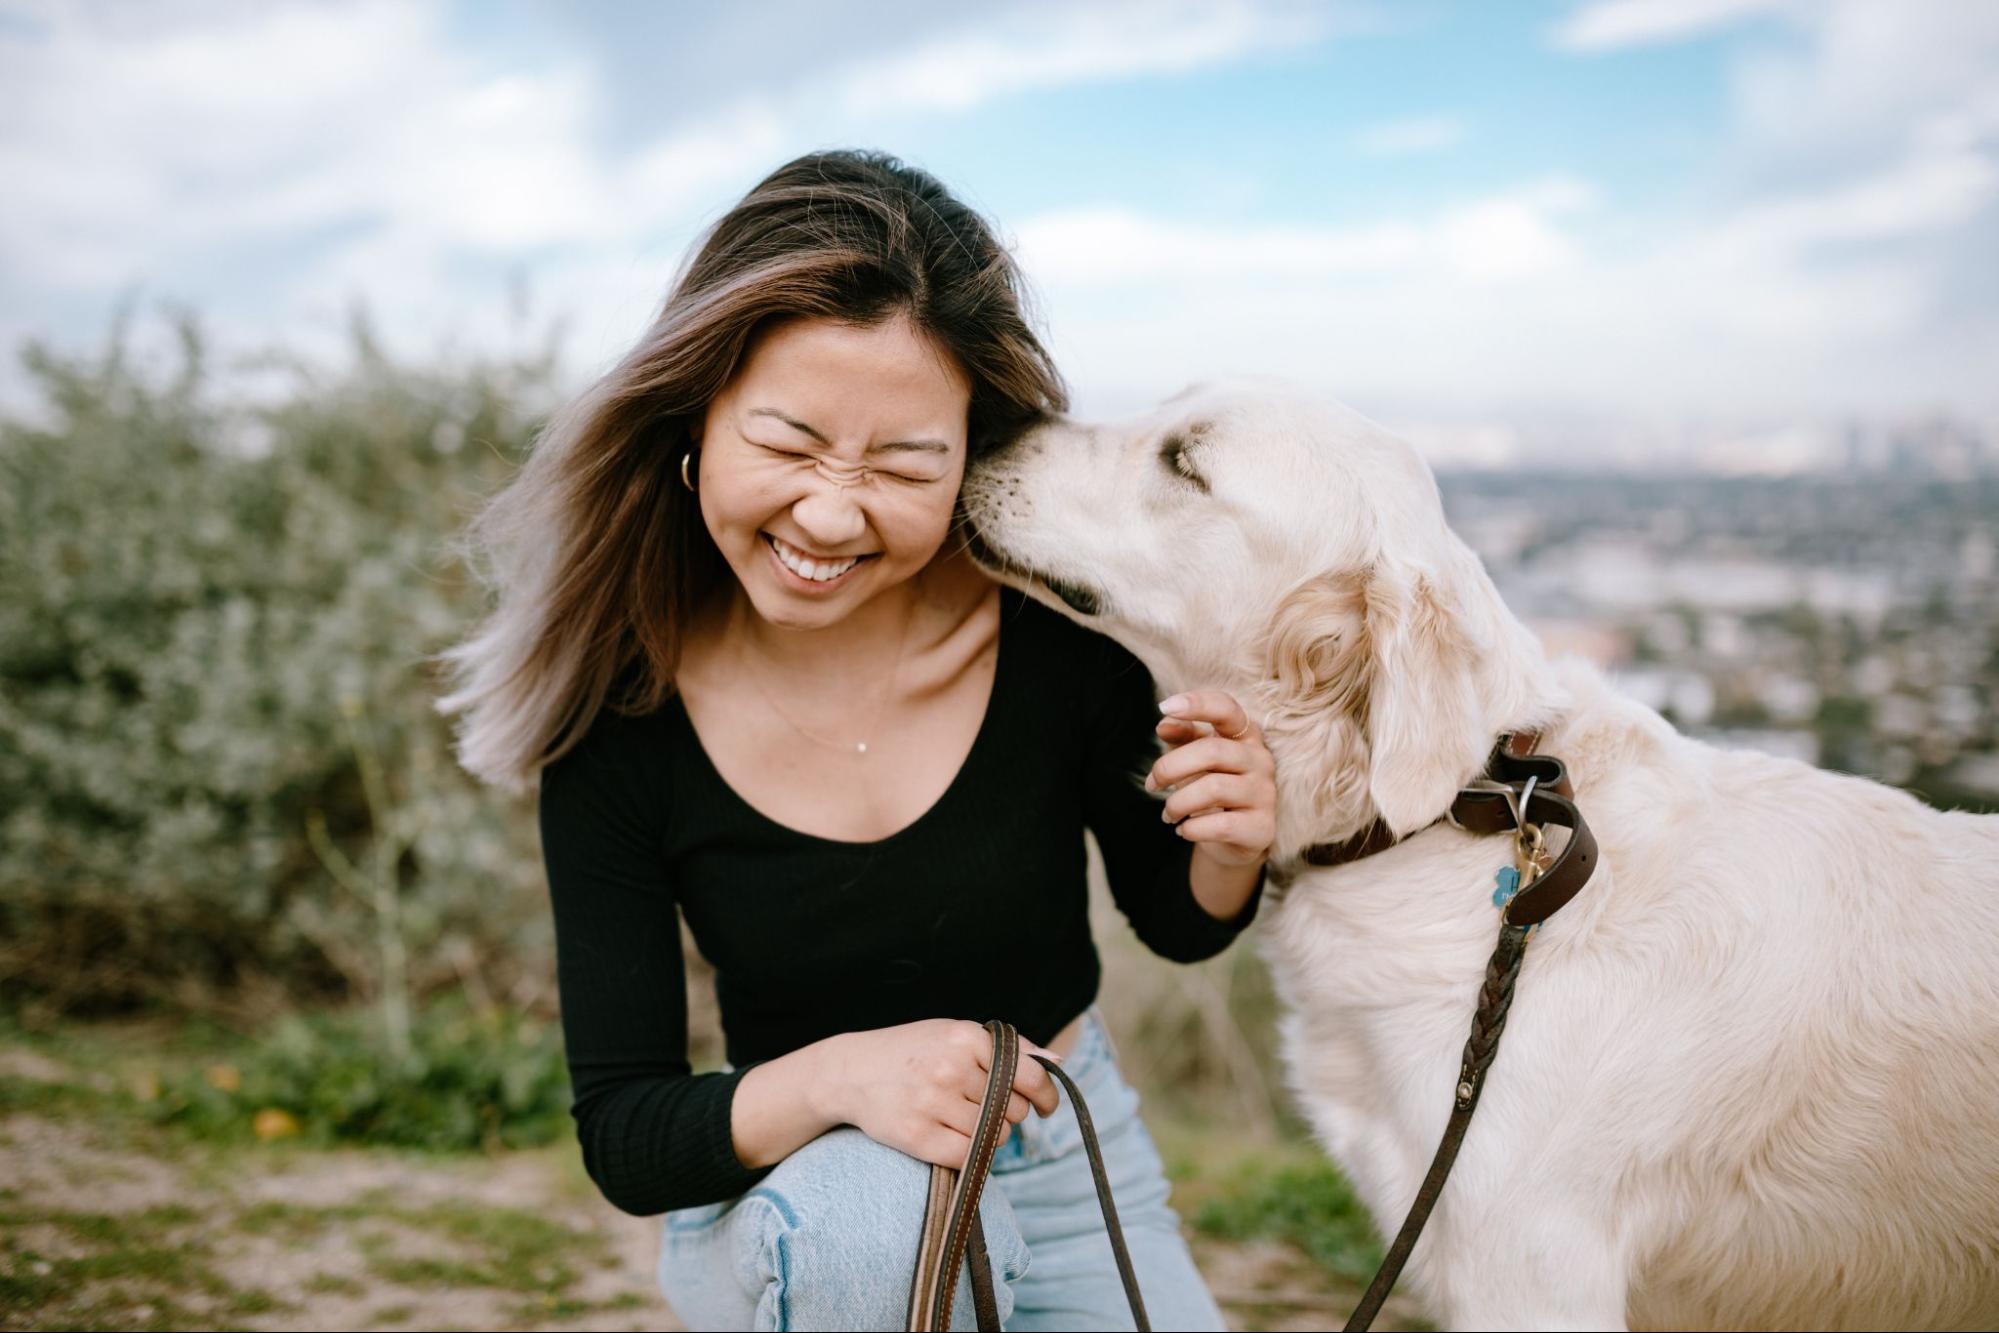 woman smiling while dog licks her face in a field